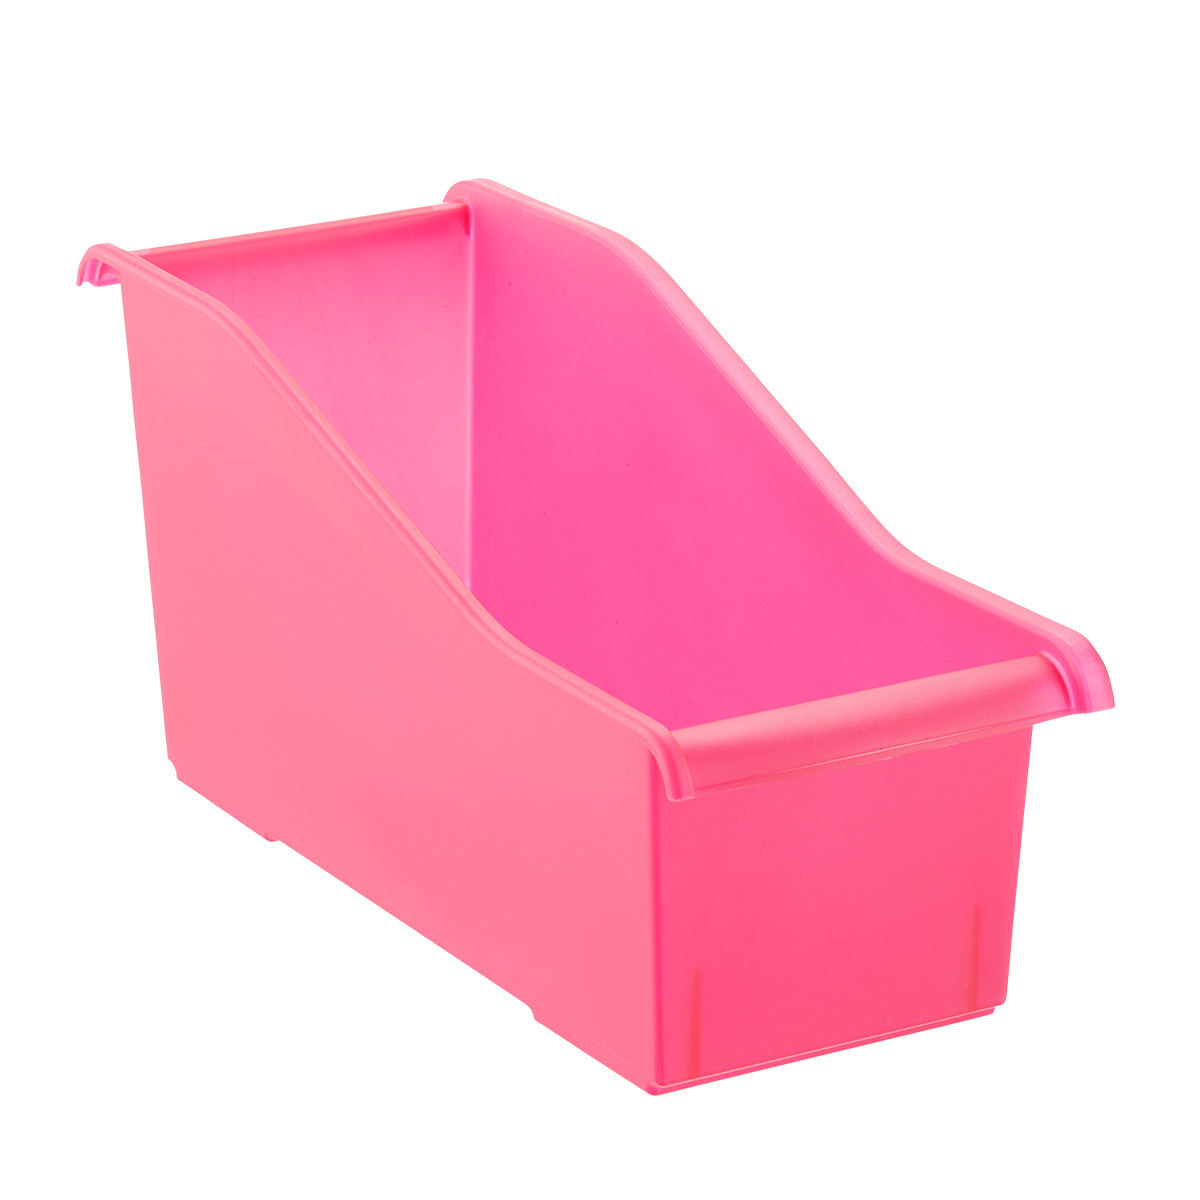 https://www.containerstore.com/catalogimages/433777/10076098-connecting-book-bin-fuchsia.jpg